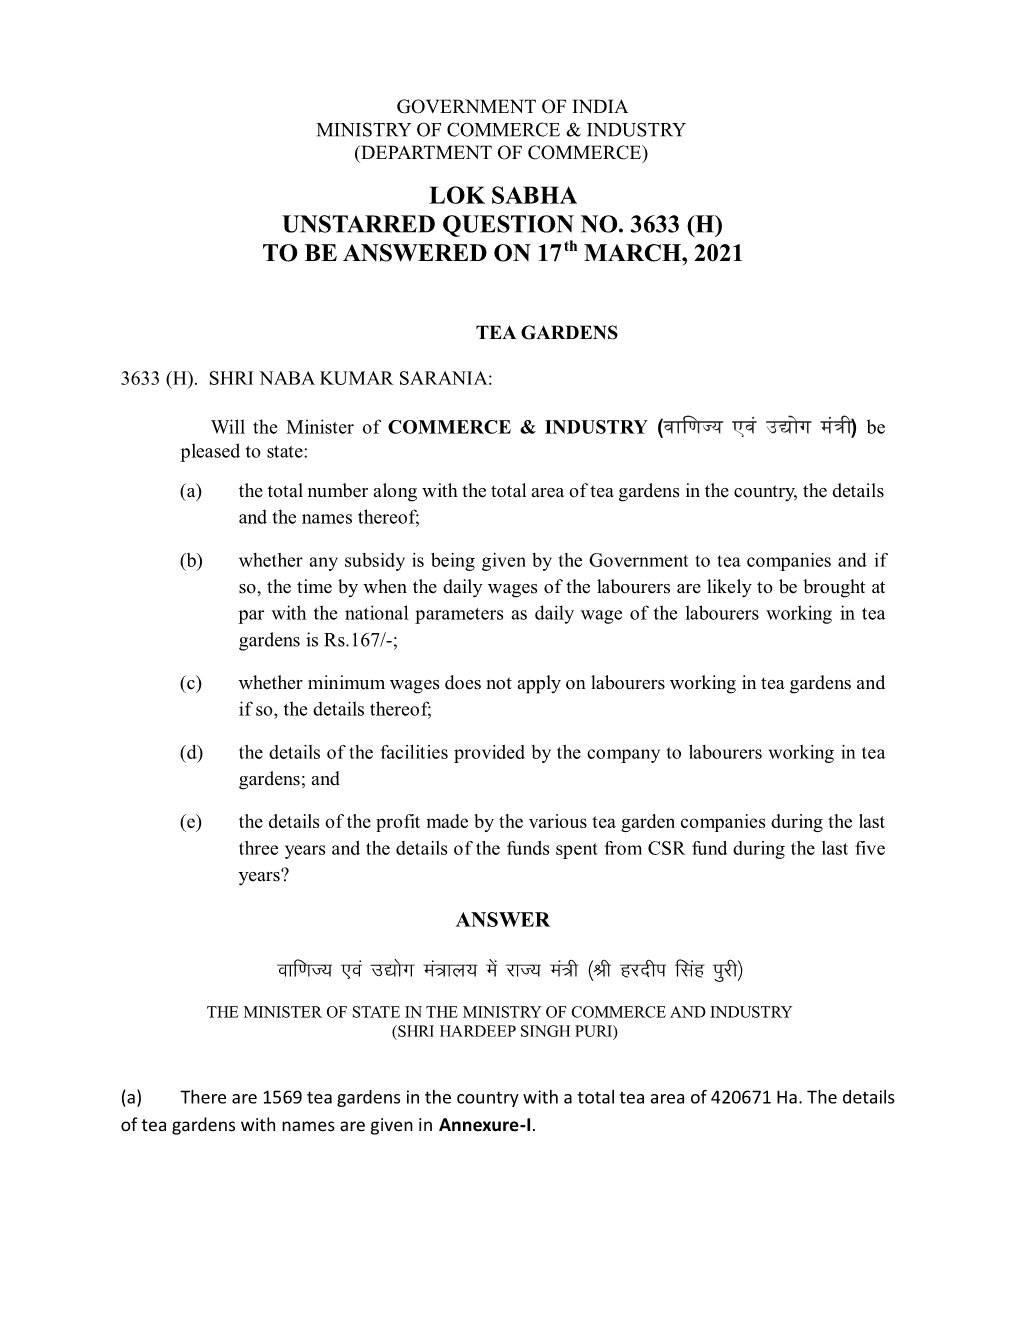 LOK SABHA UNSTARRED QUESTION NO. 3633 (H) to BE ANSWERED on 17Th MARCH, 2021